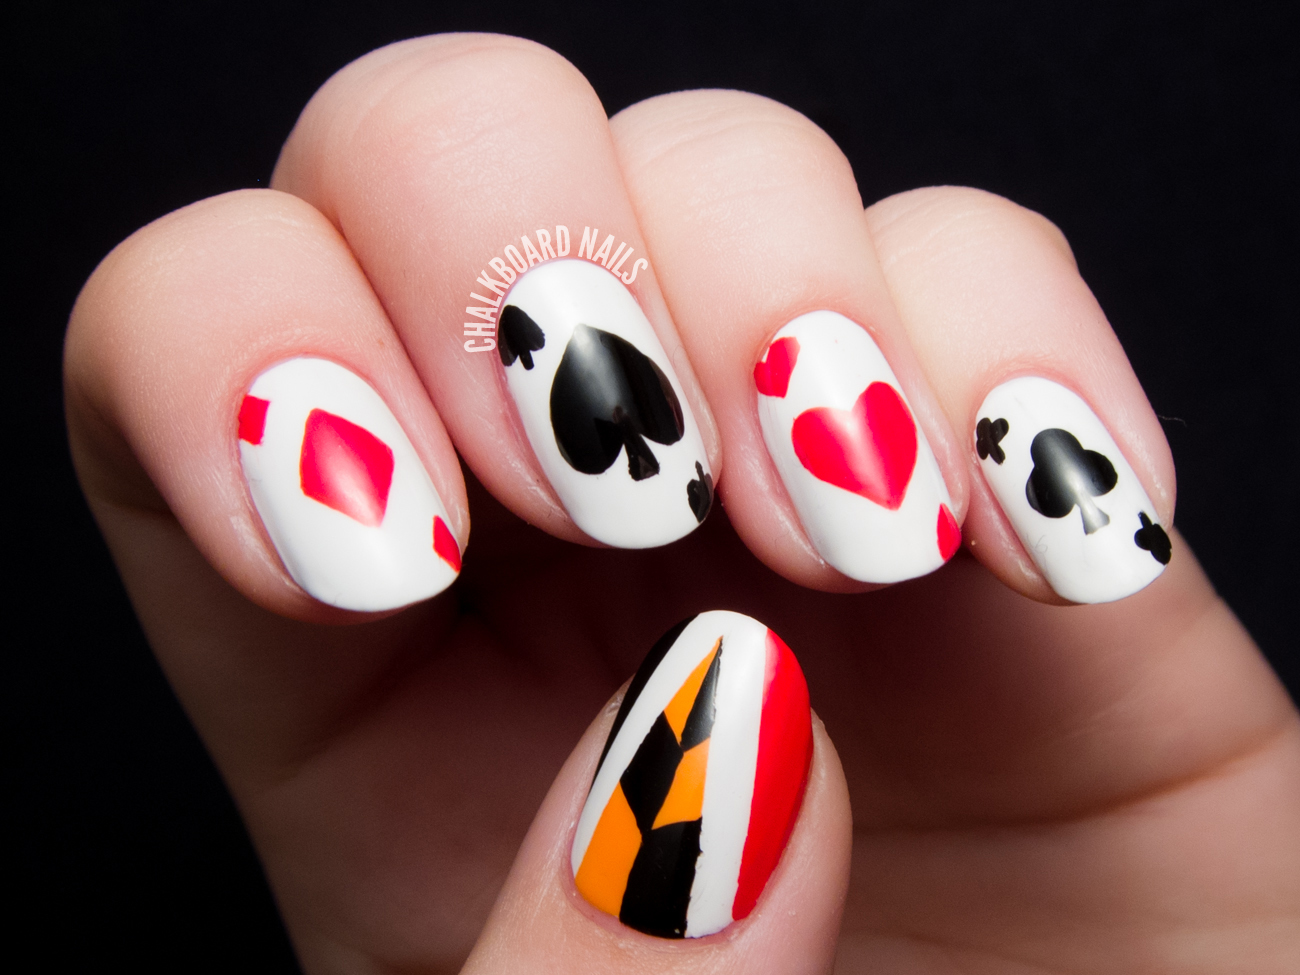 5. Queen of Hearts Nail Art - wide 8